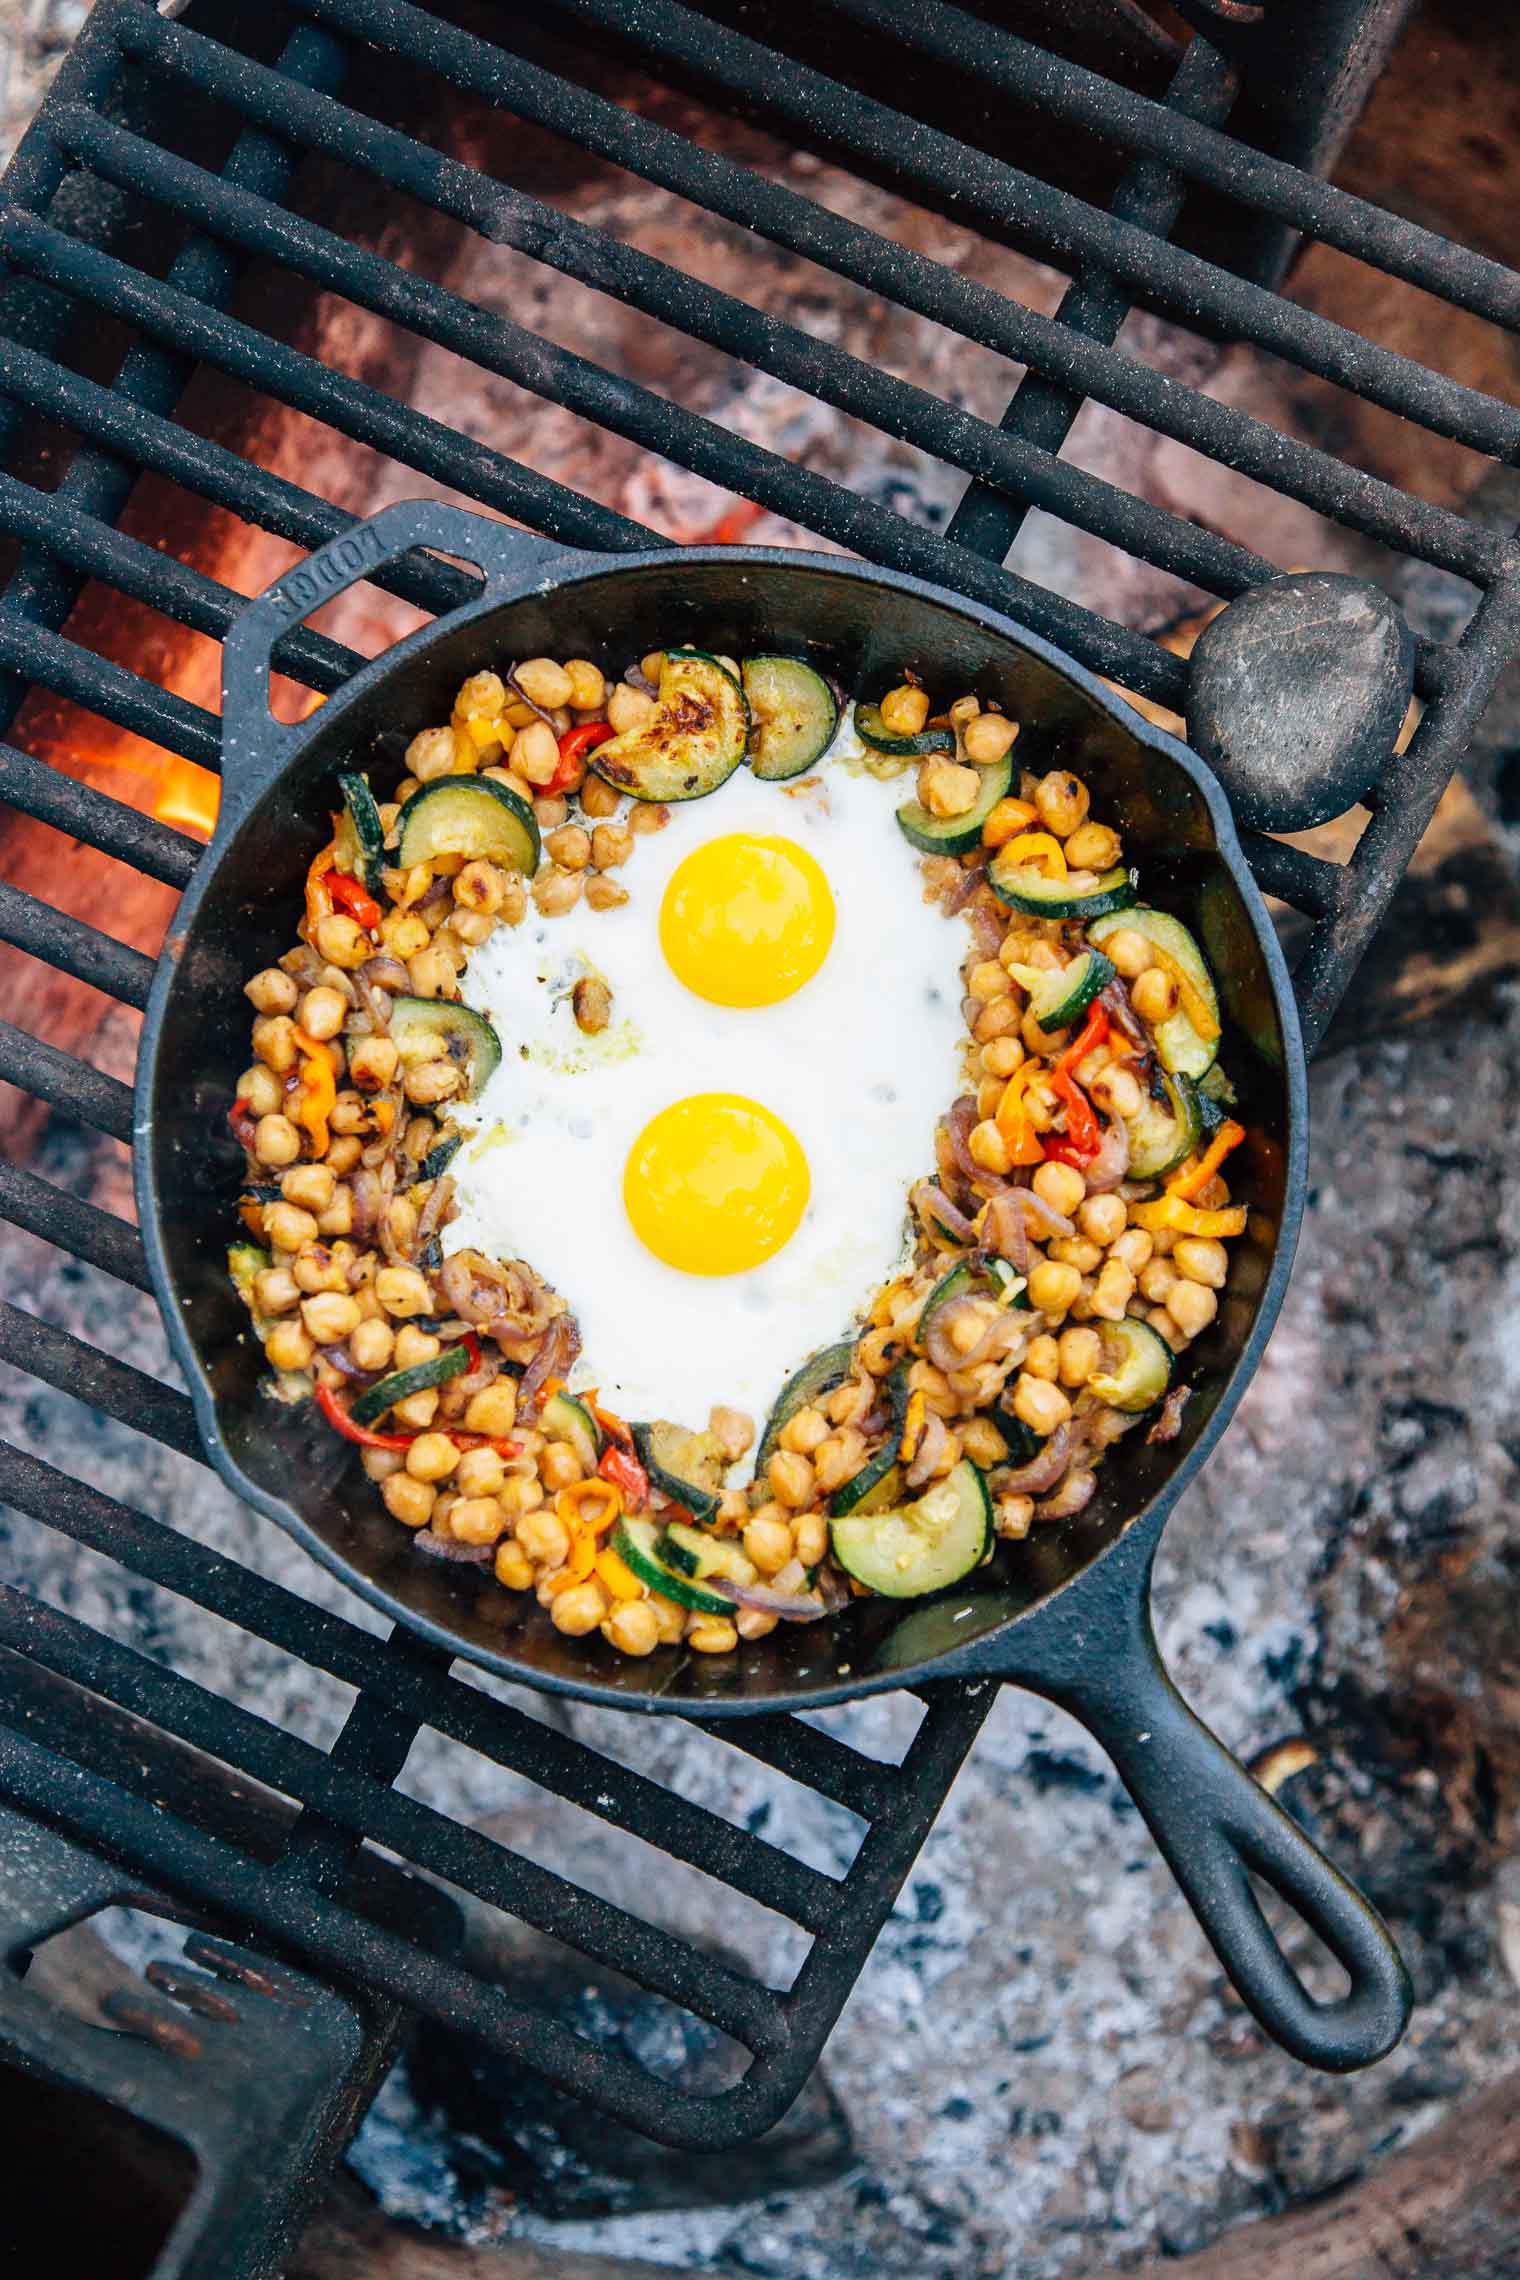 Chickpea breakfast hash with eggs in a cast iron skillet on a campfire.